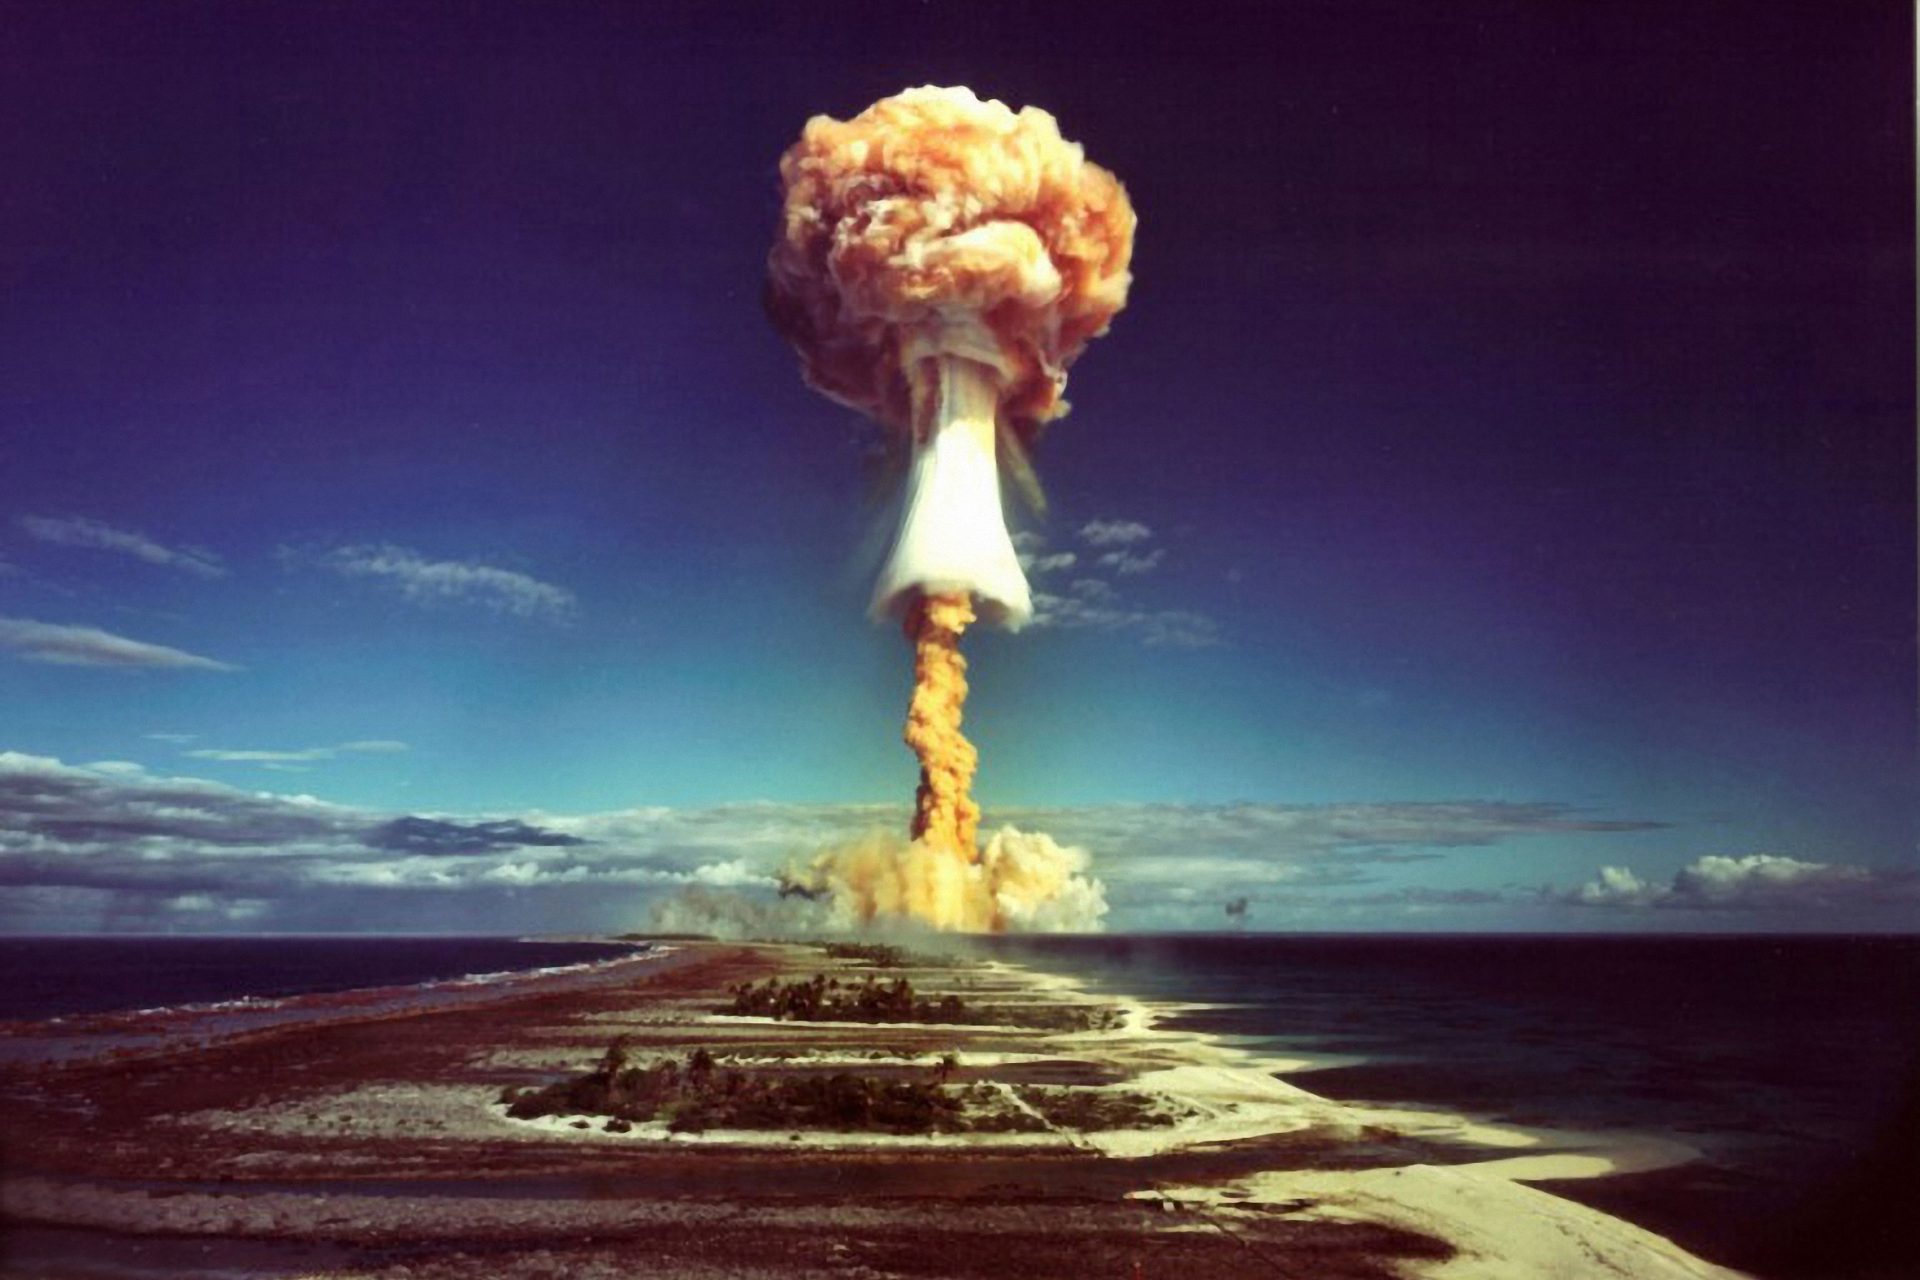 The Unimaginable Heat and Shock of a Nuclear Explosion